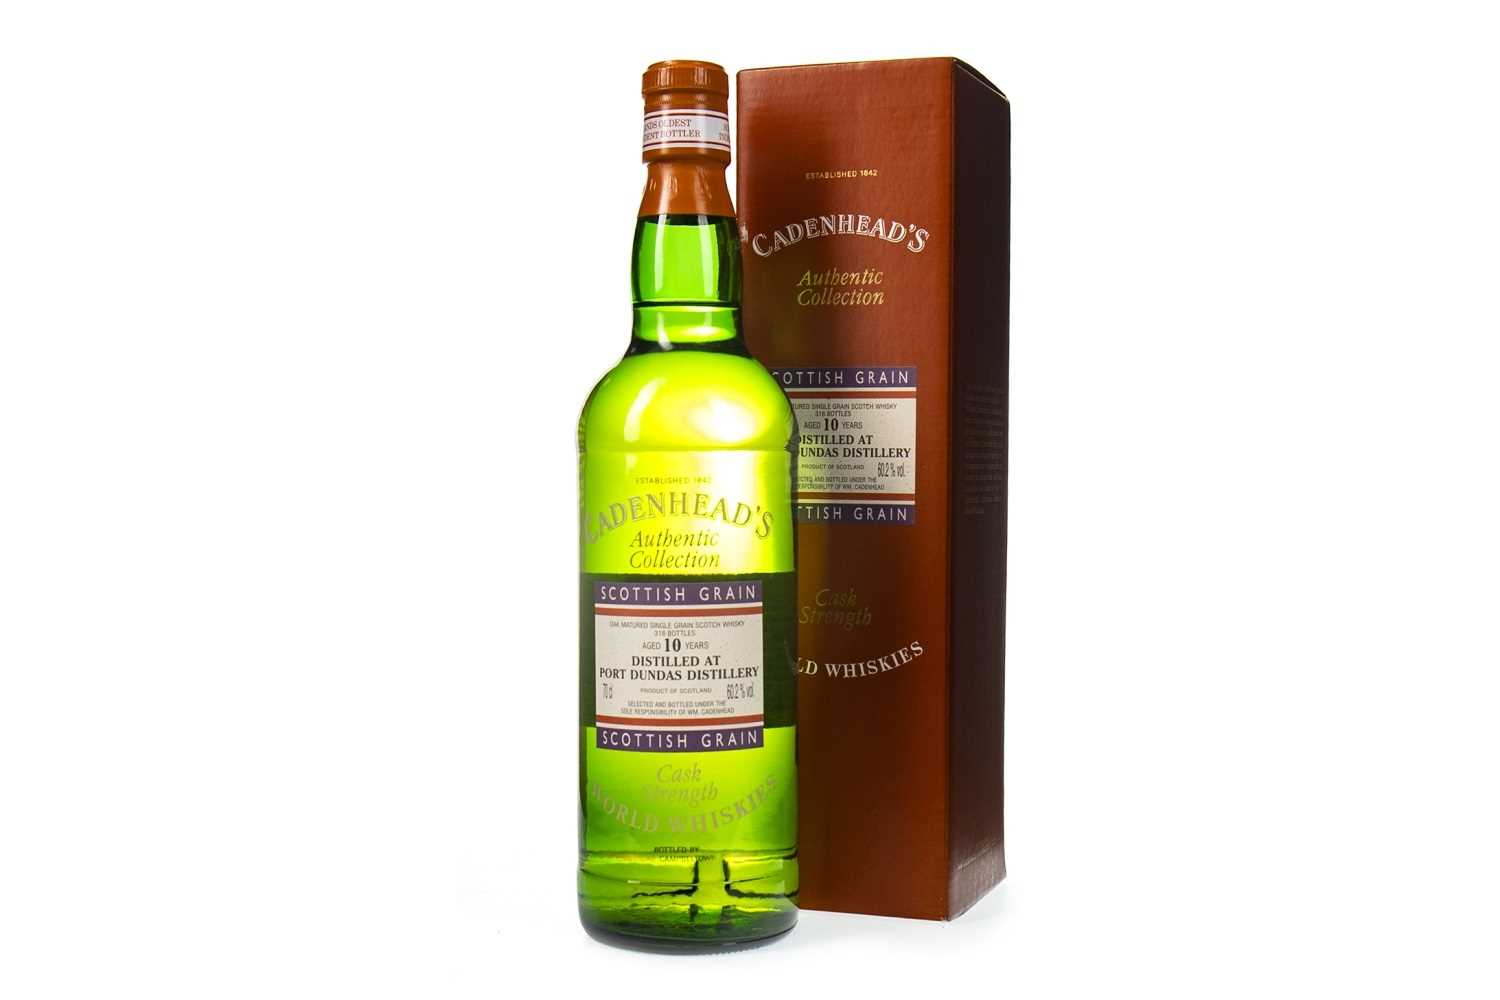 Lot 435 - PORT DUNDAS CADENHEAD'S AUTHENTIC COLLECTION AGED 10 YEARS